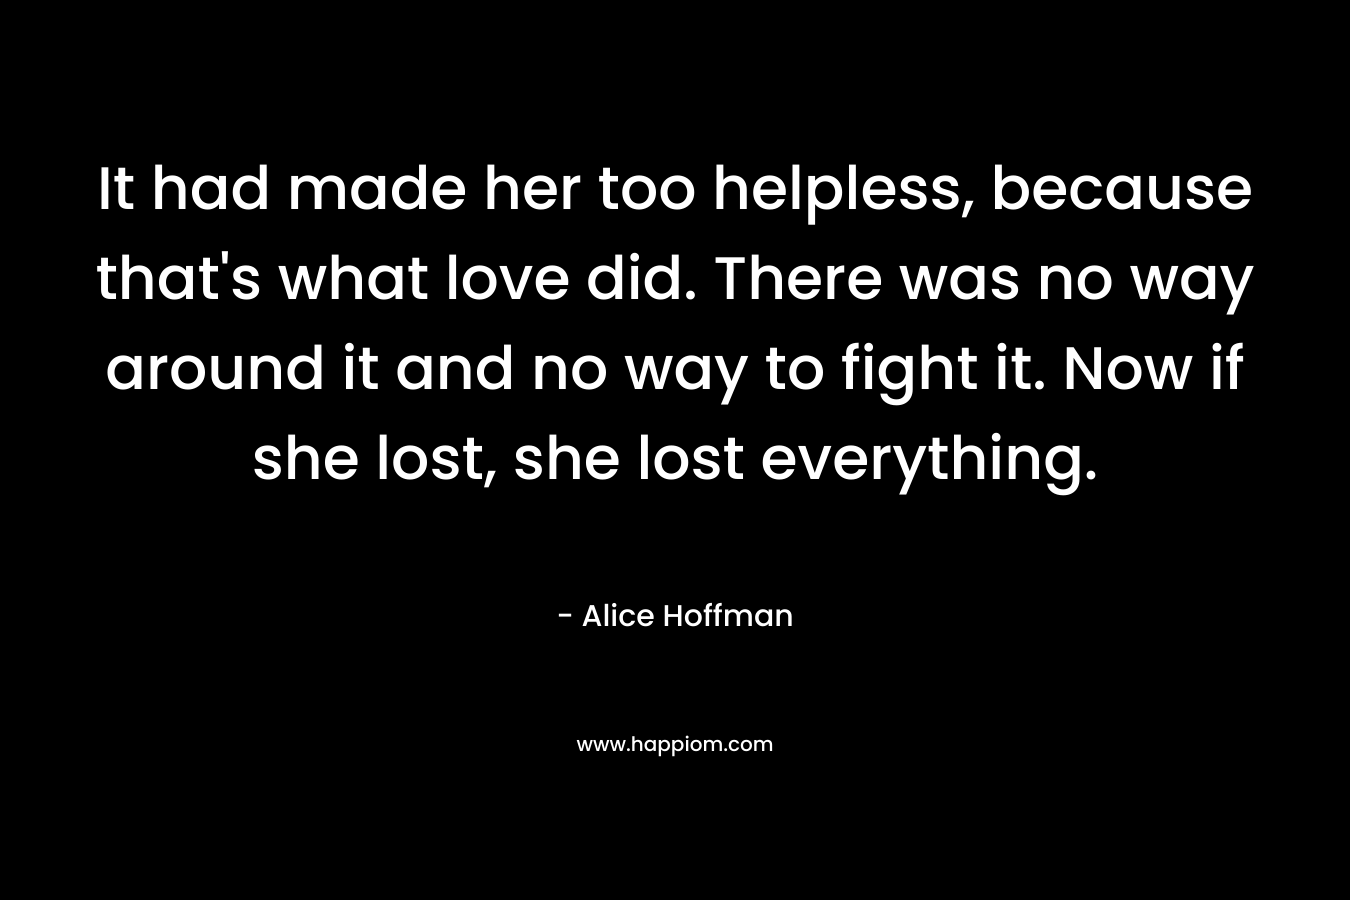 It had made her too helpless, because that's what love did. There was no way around it and no way to fight it. Now if she lost, she lost everything.